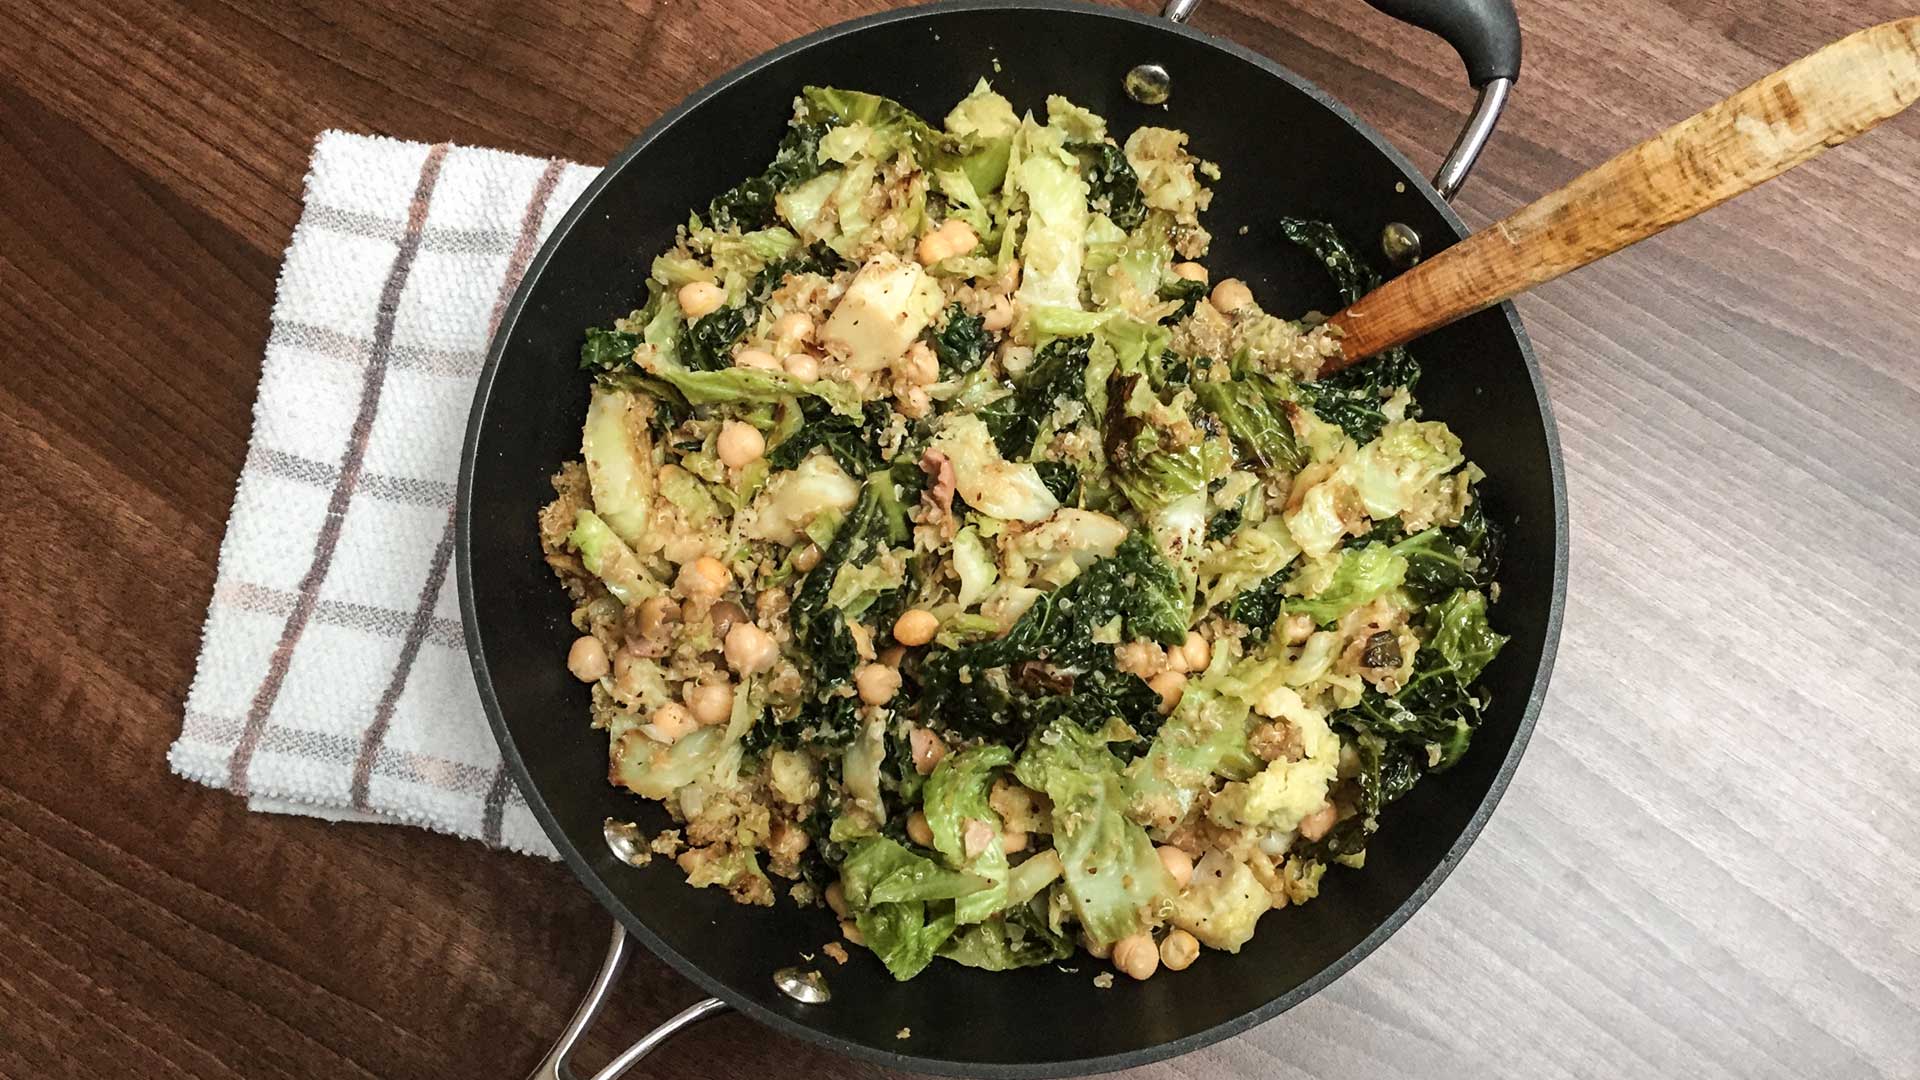 Toasted lemon quinoa cabbage salad in a large skillet on wooden dinner table with kitchen towel